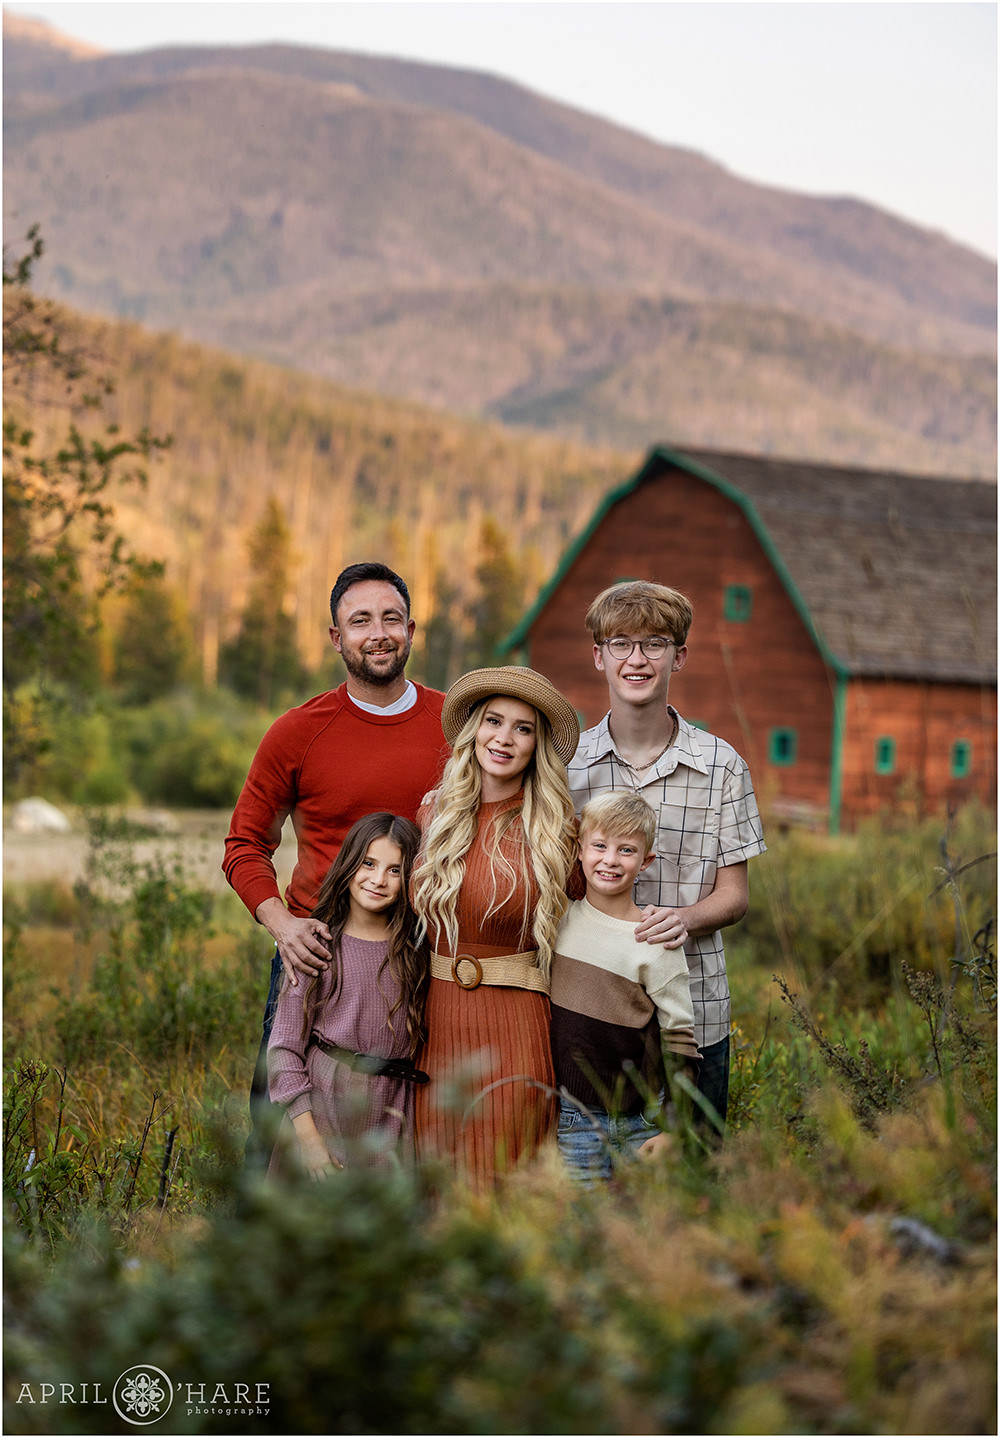 An adorable family of 5 with 3 children pose with a beautiful rustic barn and mountains in the backdrop of Grand Lake Colorado